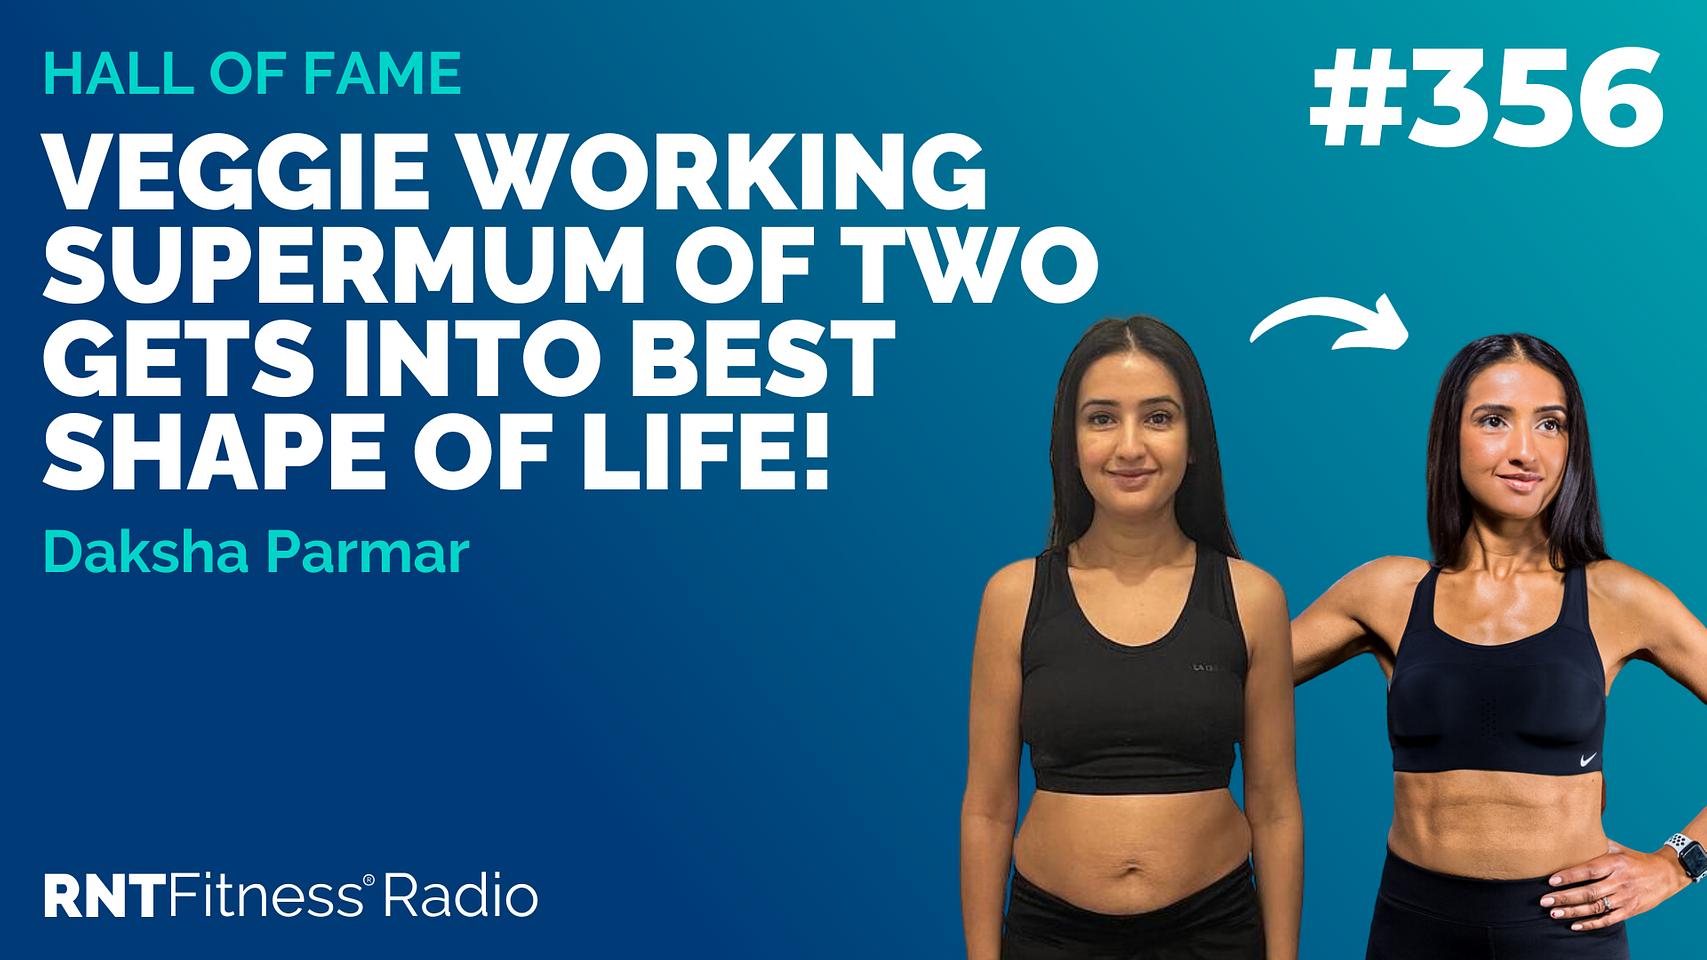 Ep 356 - Hall Of Fame | Daksha Parmar: Veggie Working Supermum Of Two Builds Consistency To Get Into Best Shape Of Her Life!